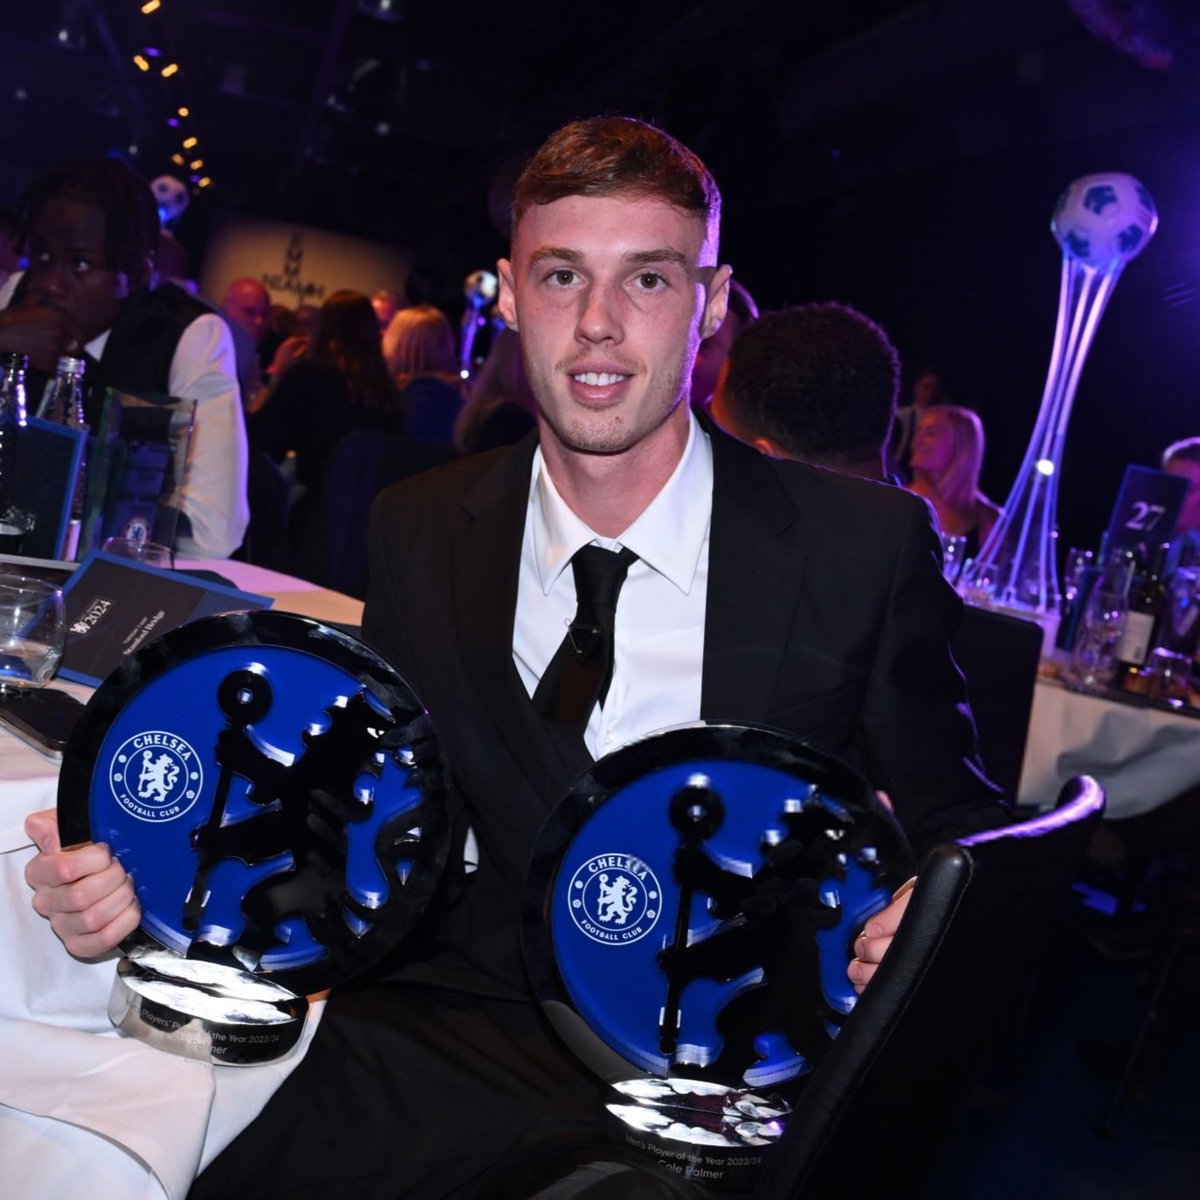 Chelsea Football Club’s Cole Palmer. Men’s Player of the Year ✅ Men’s Player’s Player of the Year ✅ PFA Young Player of the Year ⏳ 🥶